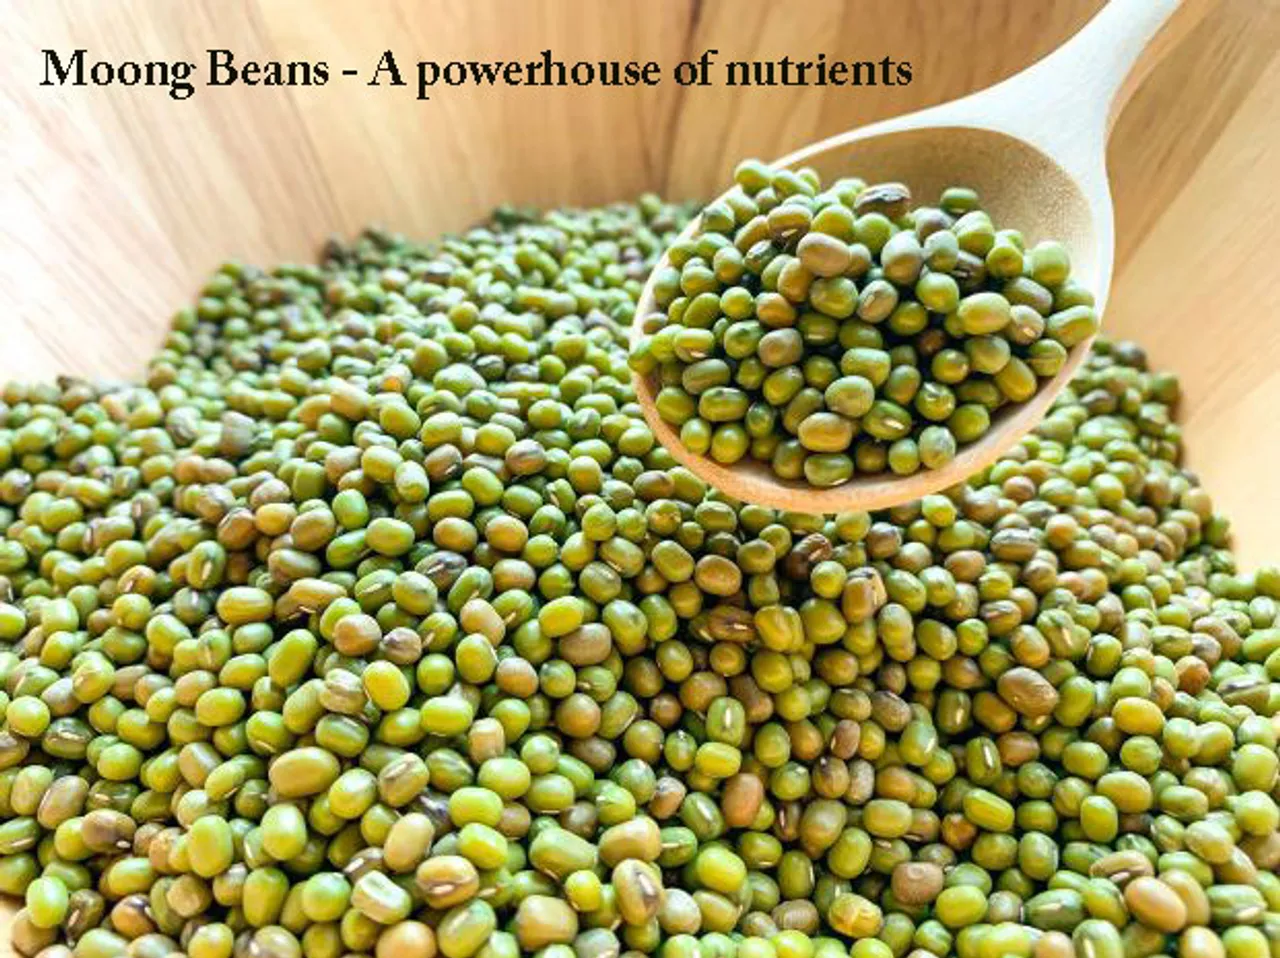 How well do you know your moong